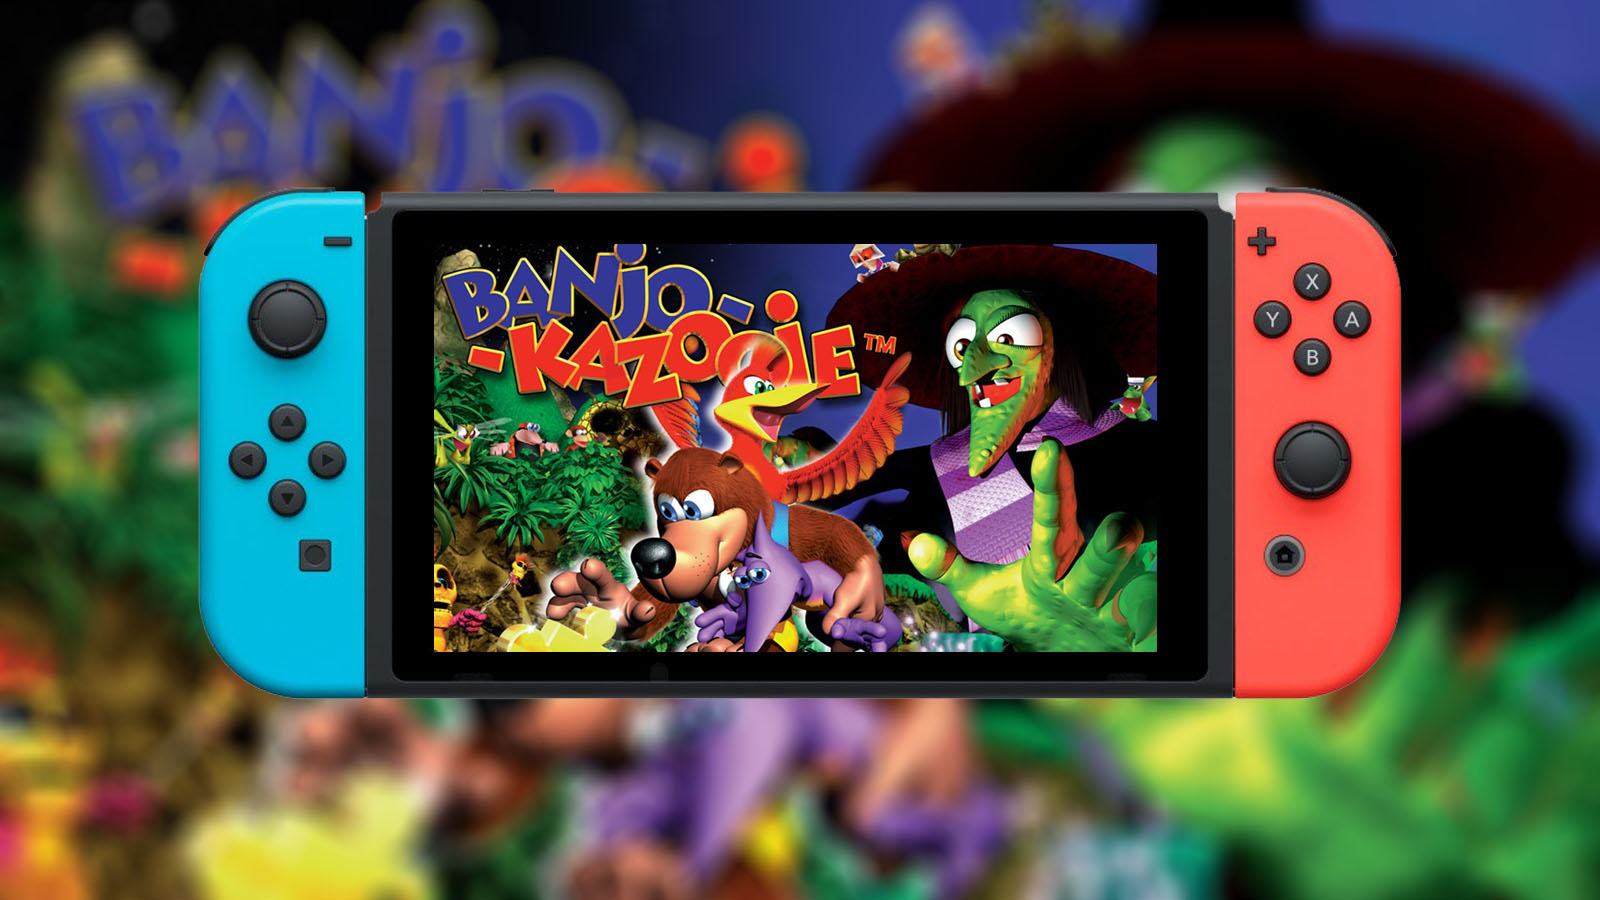 Banjo-Kazooie' hits Nintendo Switch Online's Expansion Pack on January 20th